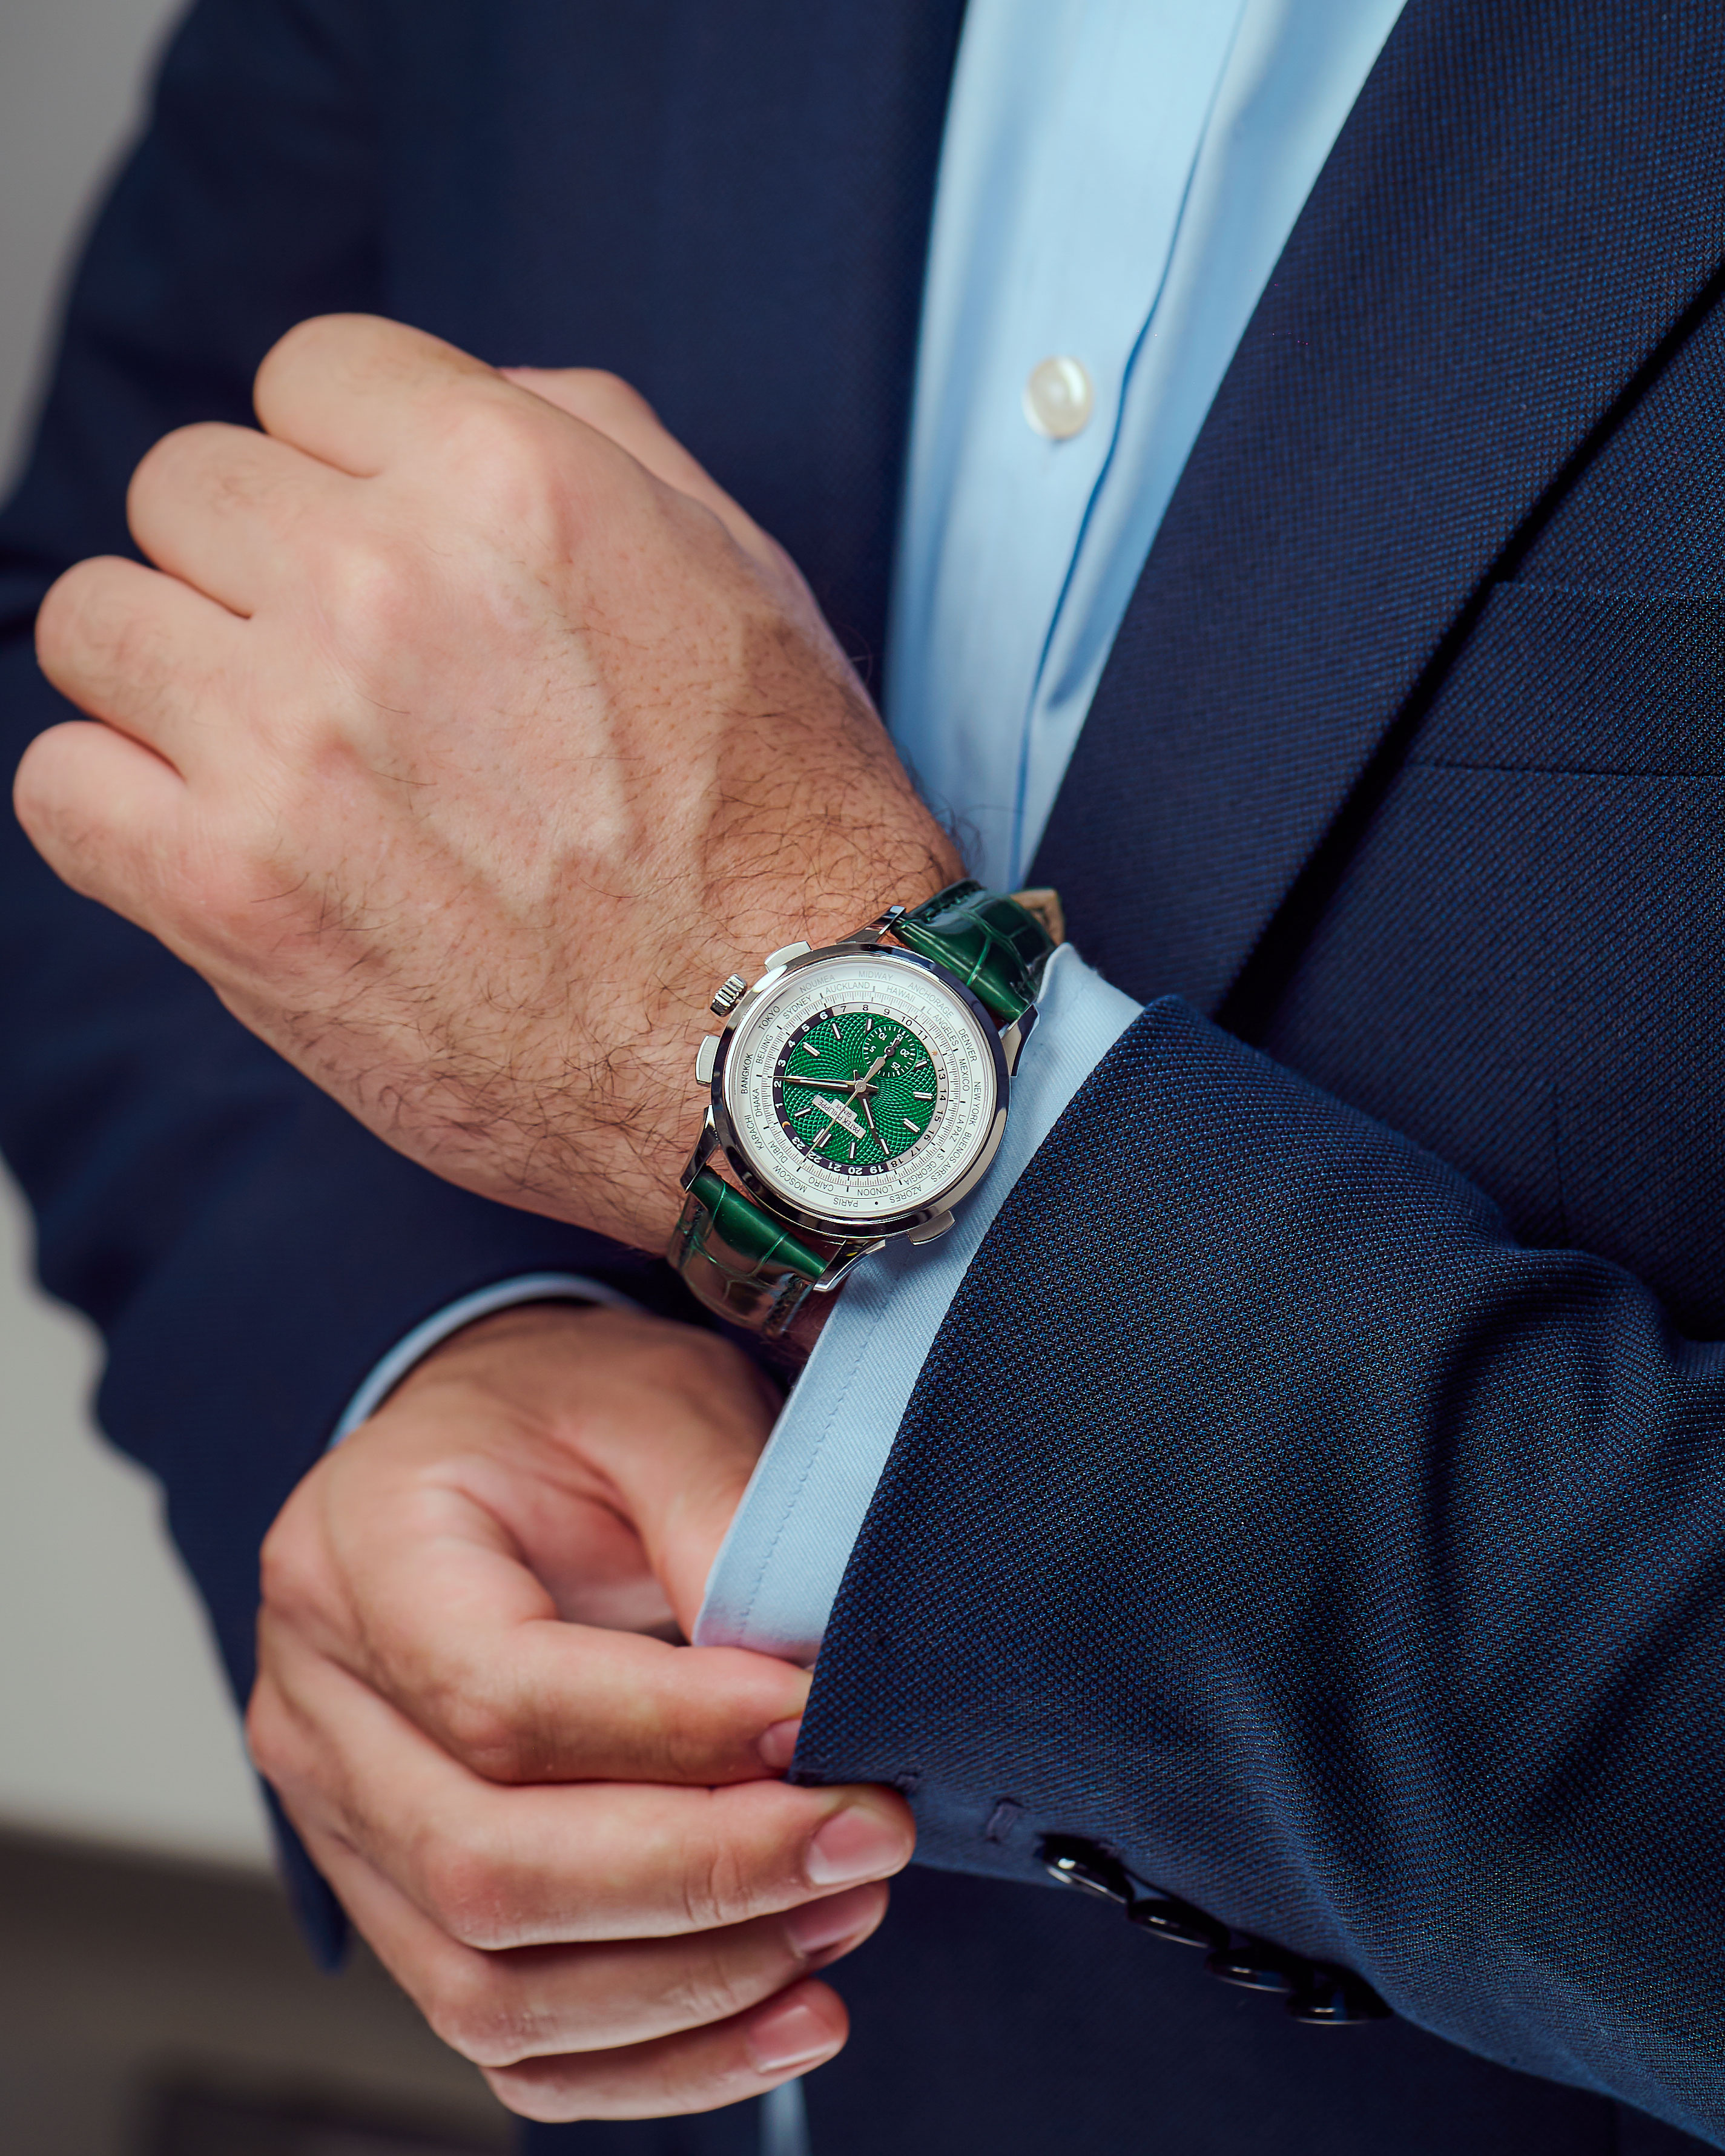 Platinum Timepiece with Green Index Dial and Green Leather Bracelet on the Wrist of a Man with Navy Blue Jacket and Light Blue Button Down